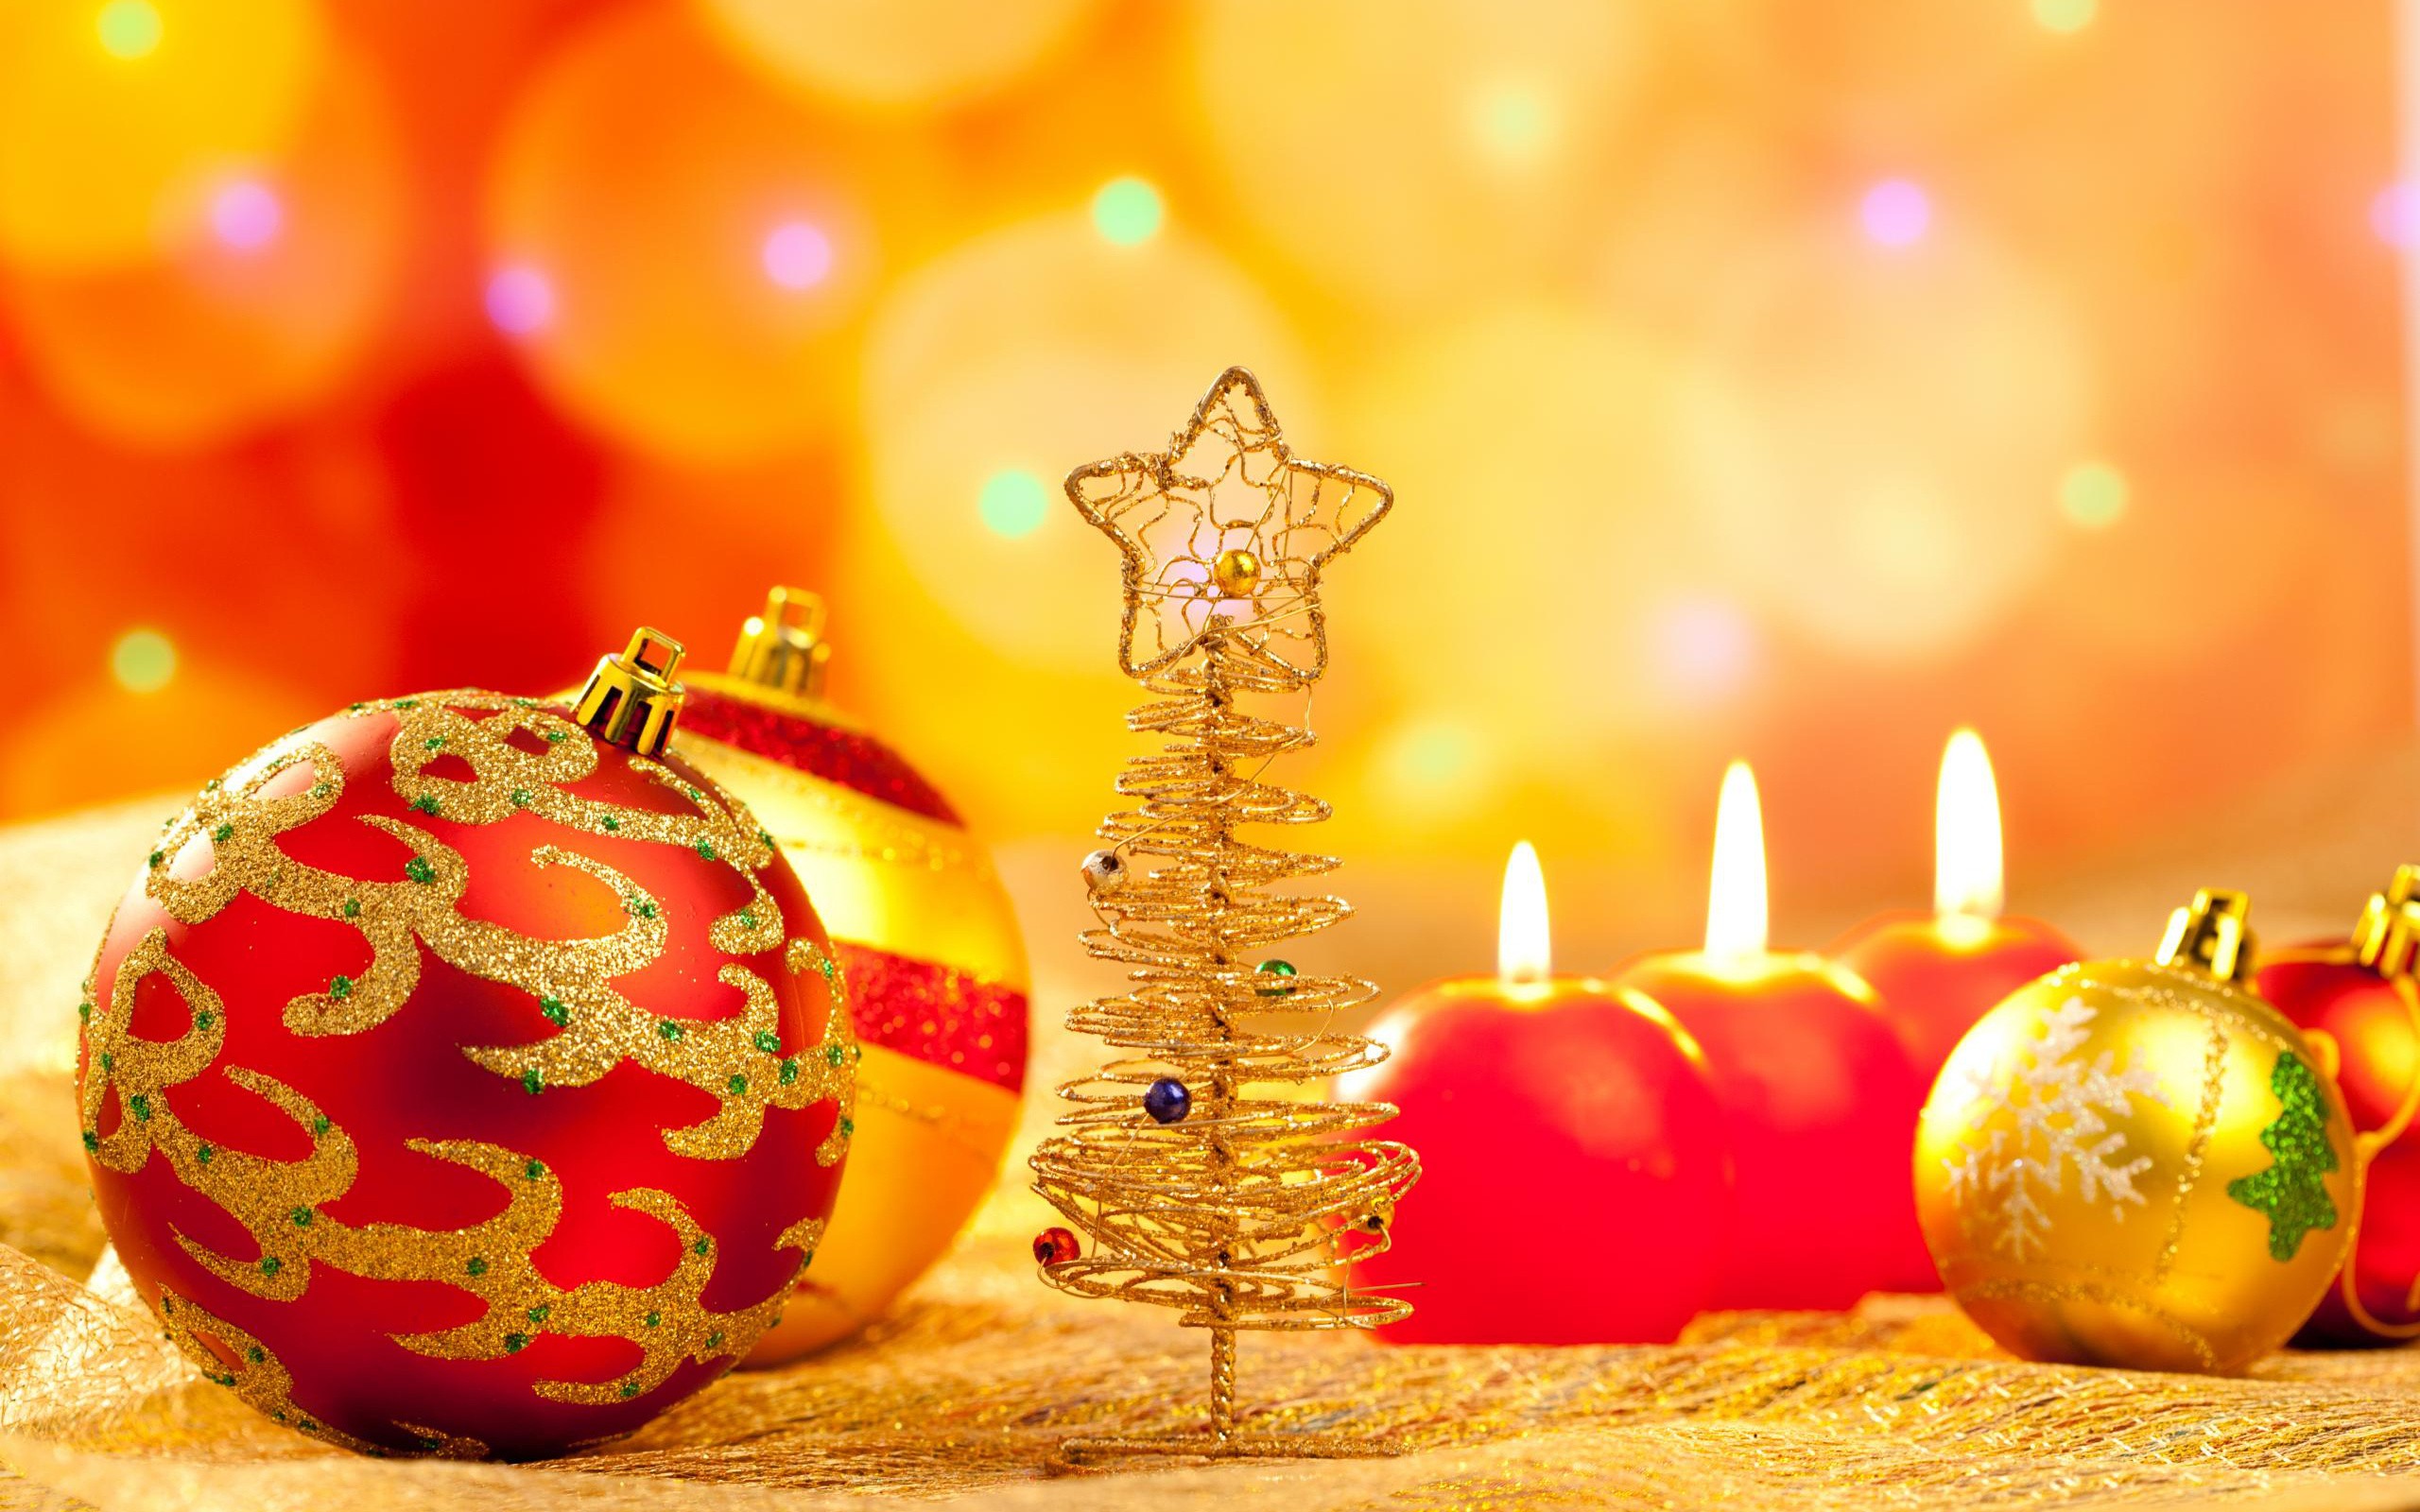 Christmas New Year Christmas Ornaments Candles Decorations 2560x1600